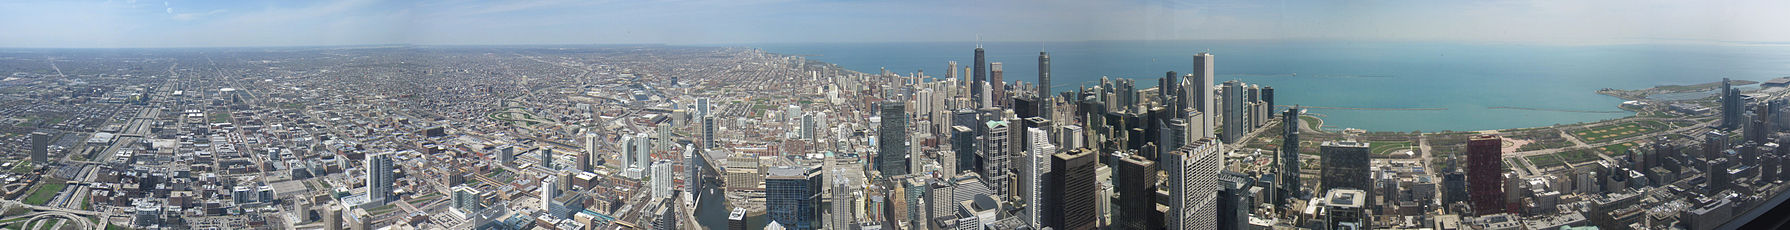 View of Chicago greater metropolitan region and the dense downtown area from the Willis Tower